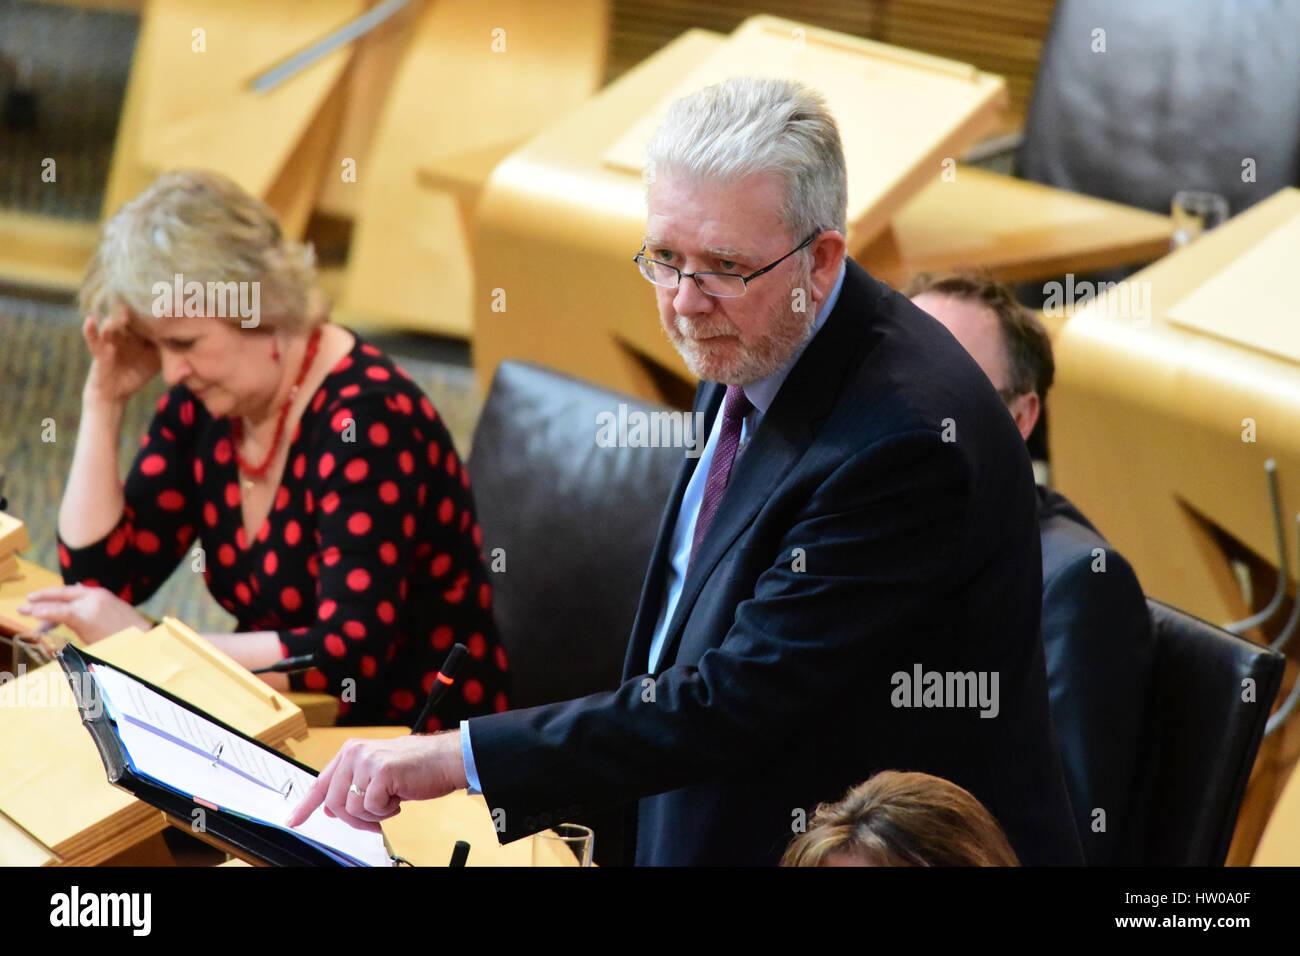 Edinburgh, Scotland, United Kingdom. 15th March, 2017. Scottish Brexit minister Michael Russell speaking during the debate in the Scottish Parliament on the implications of the European Union referendum on Scotland, Credit: Ken Jack/Alamy Live News Stock Photo